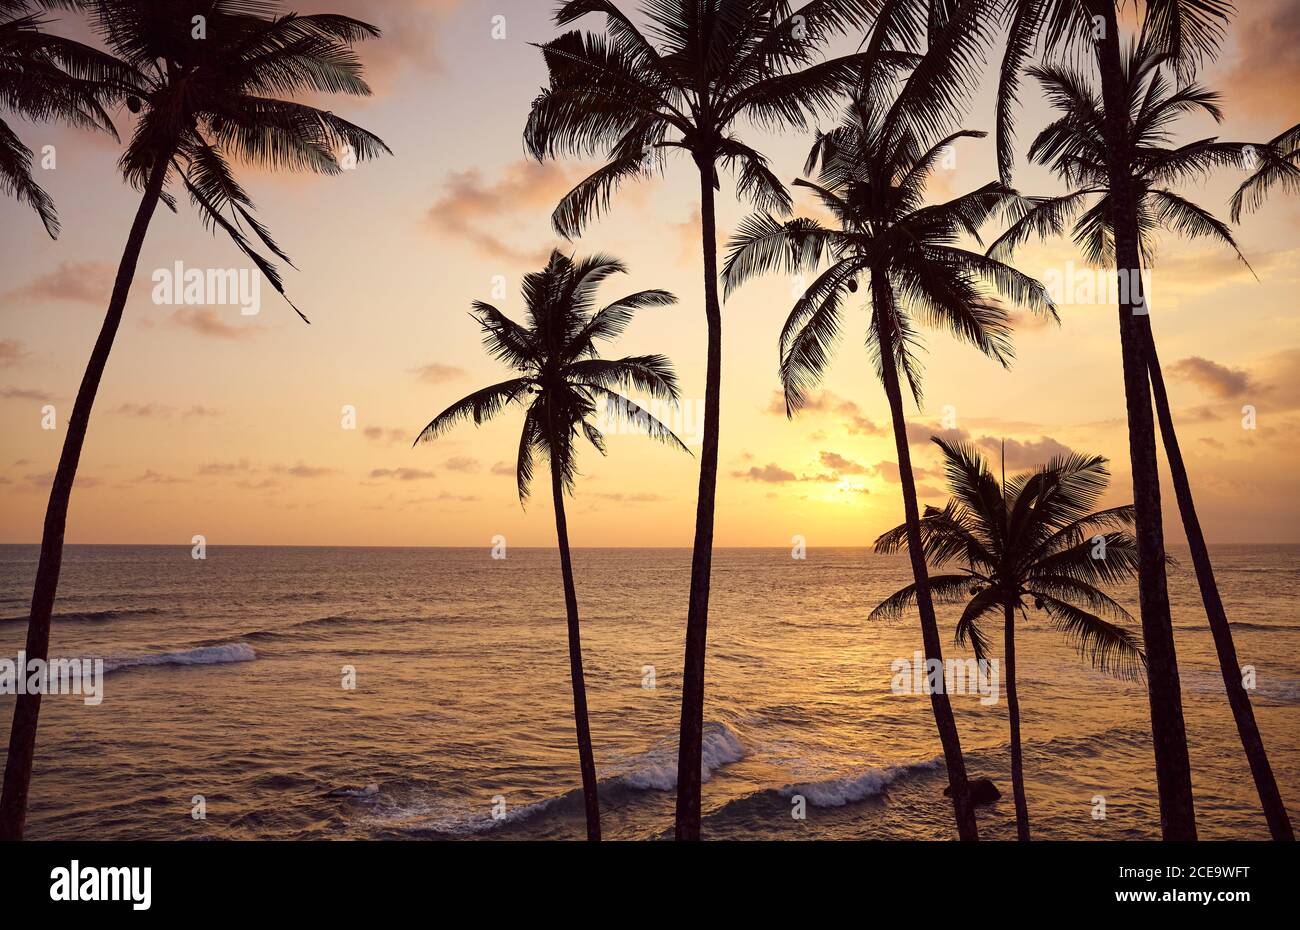 Beautiful tropical sunset with coconut palm trees silhouettes. Stock Photo